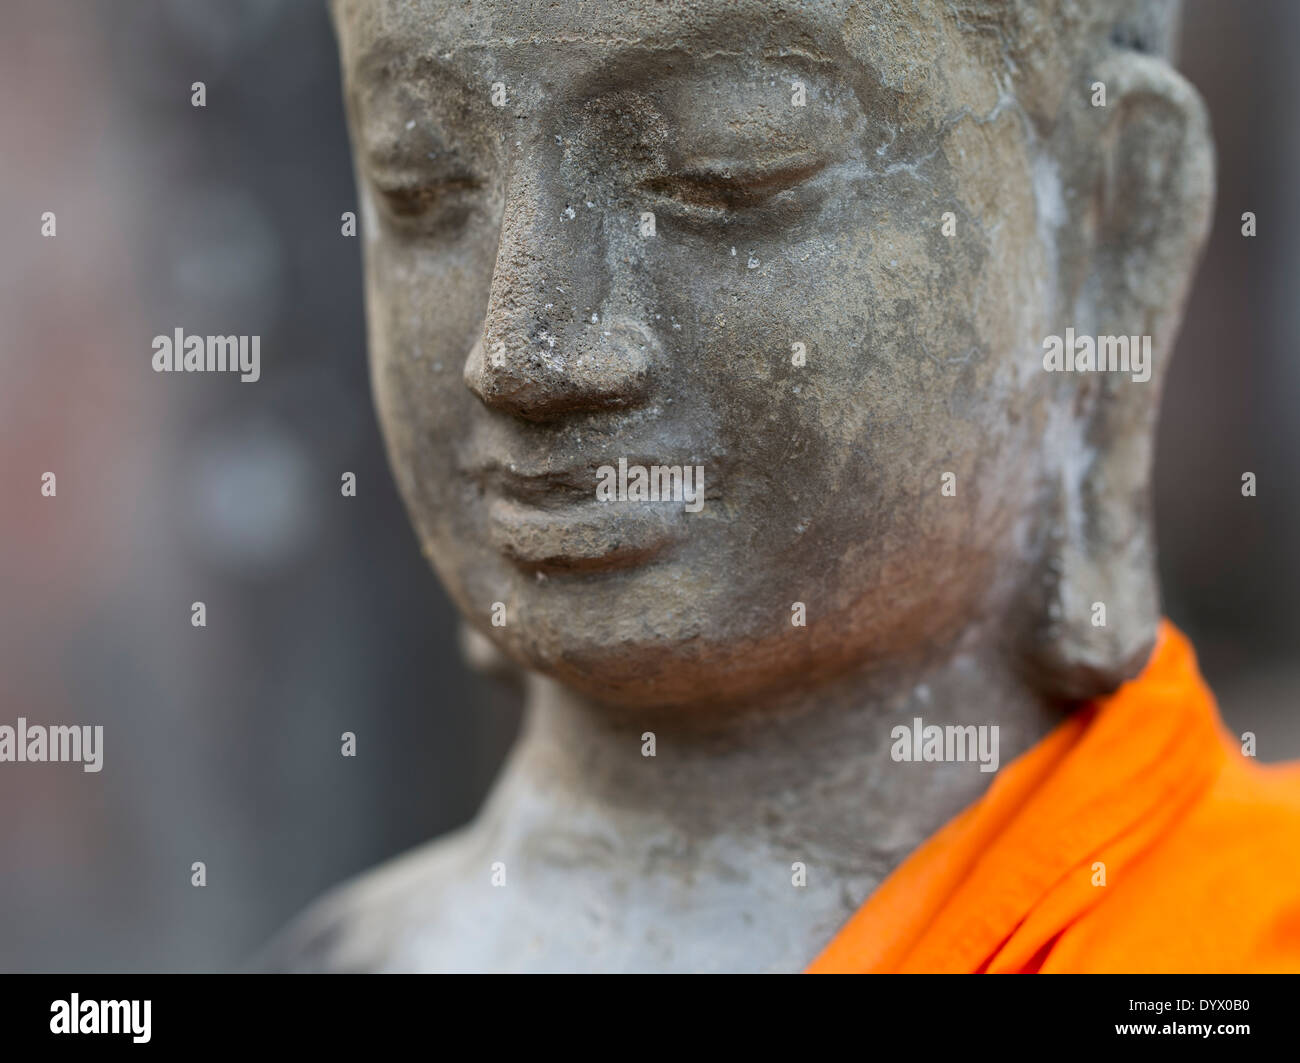 Buddhist statue in orange robes at Bayon Temple, Angkor Thom, Siem Reap, Cambodia Stock Photo